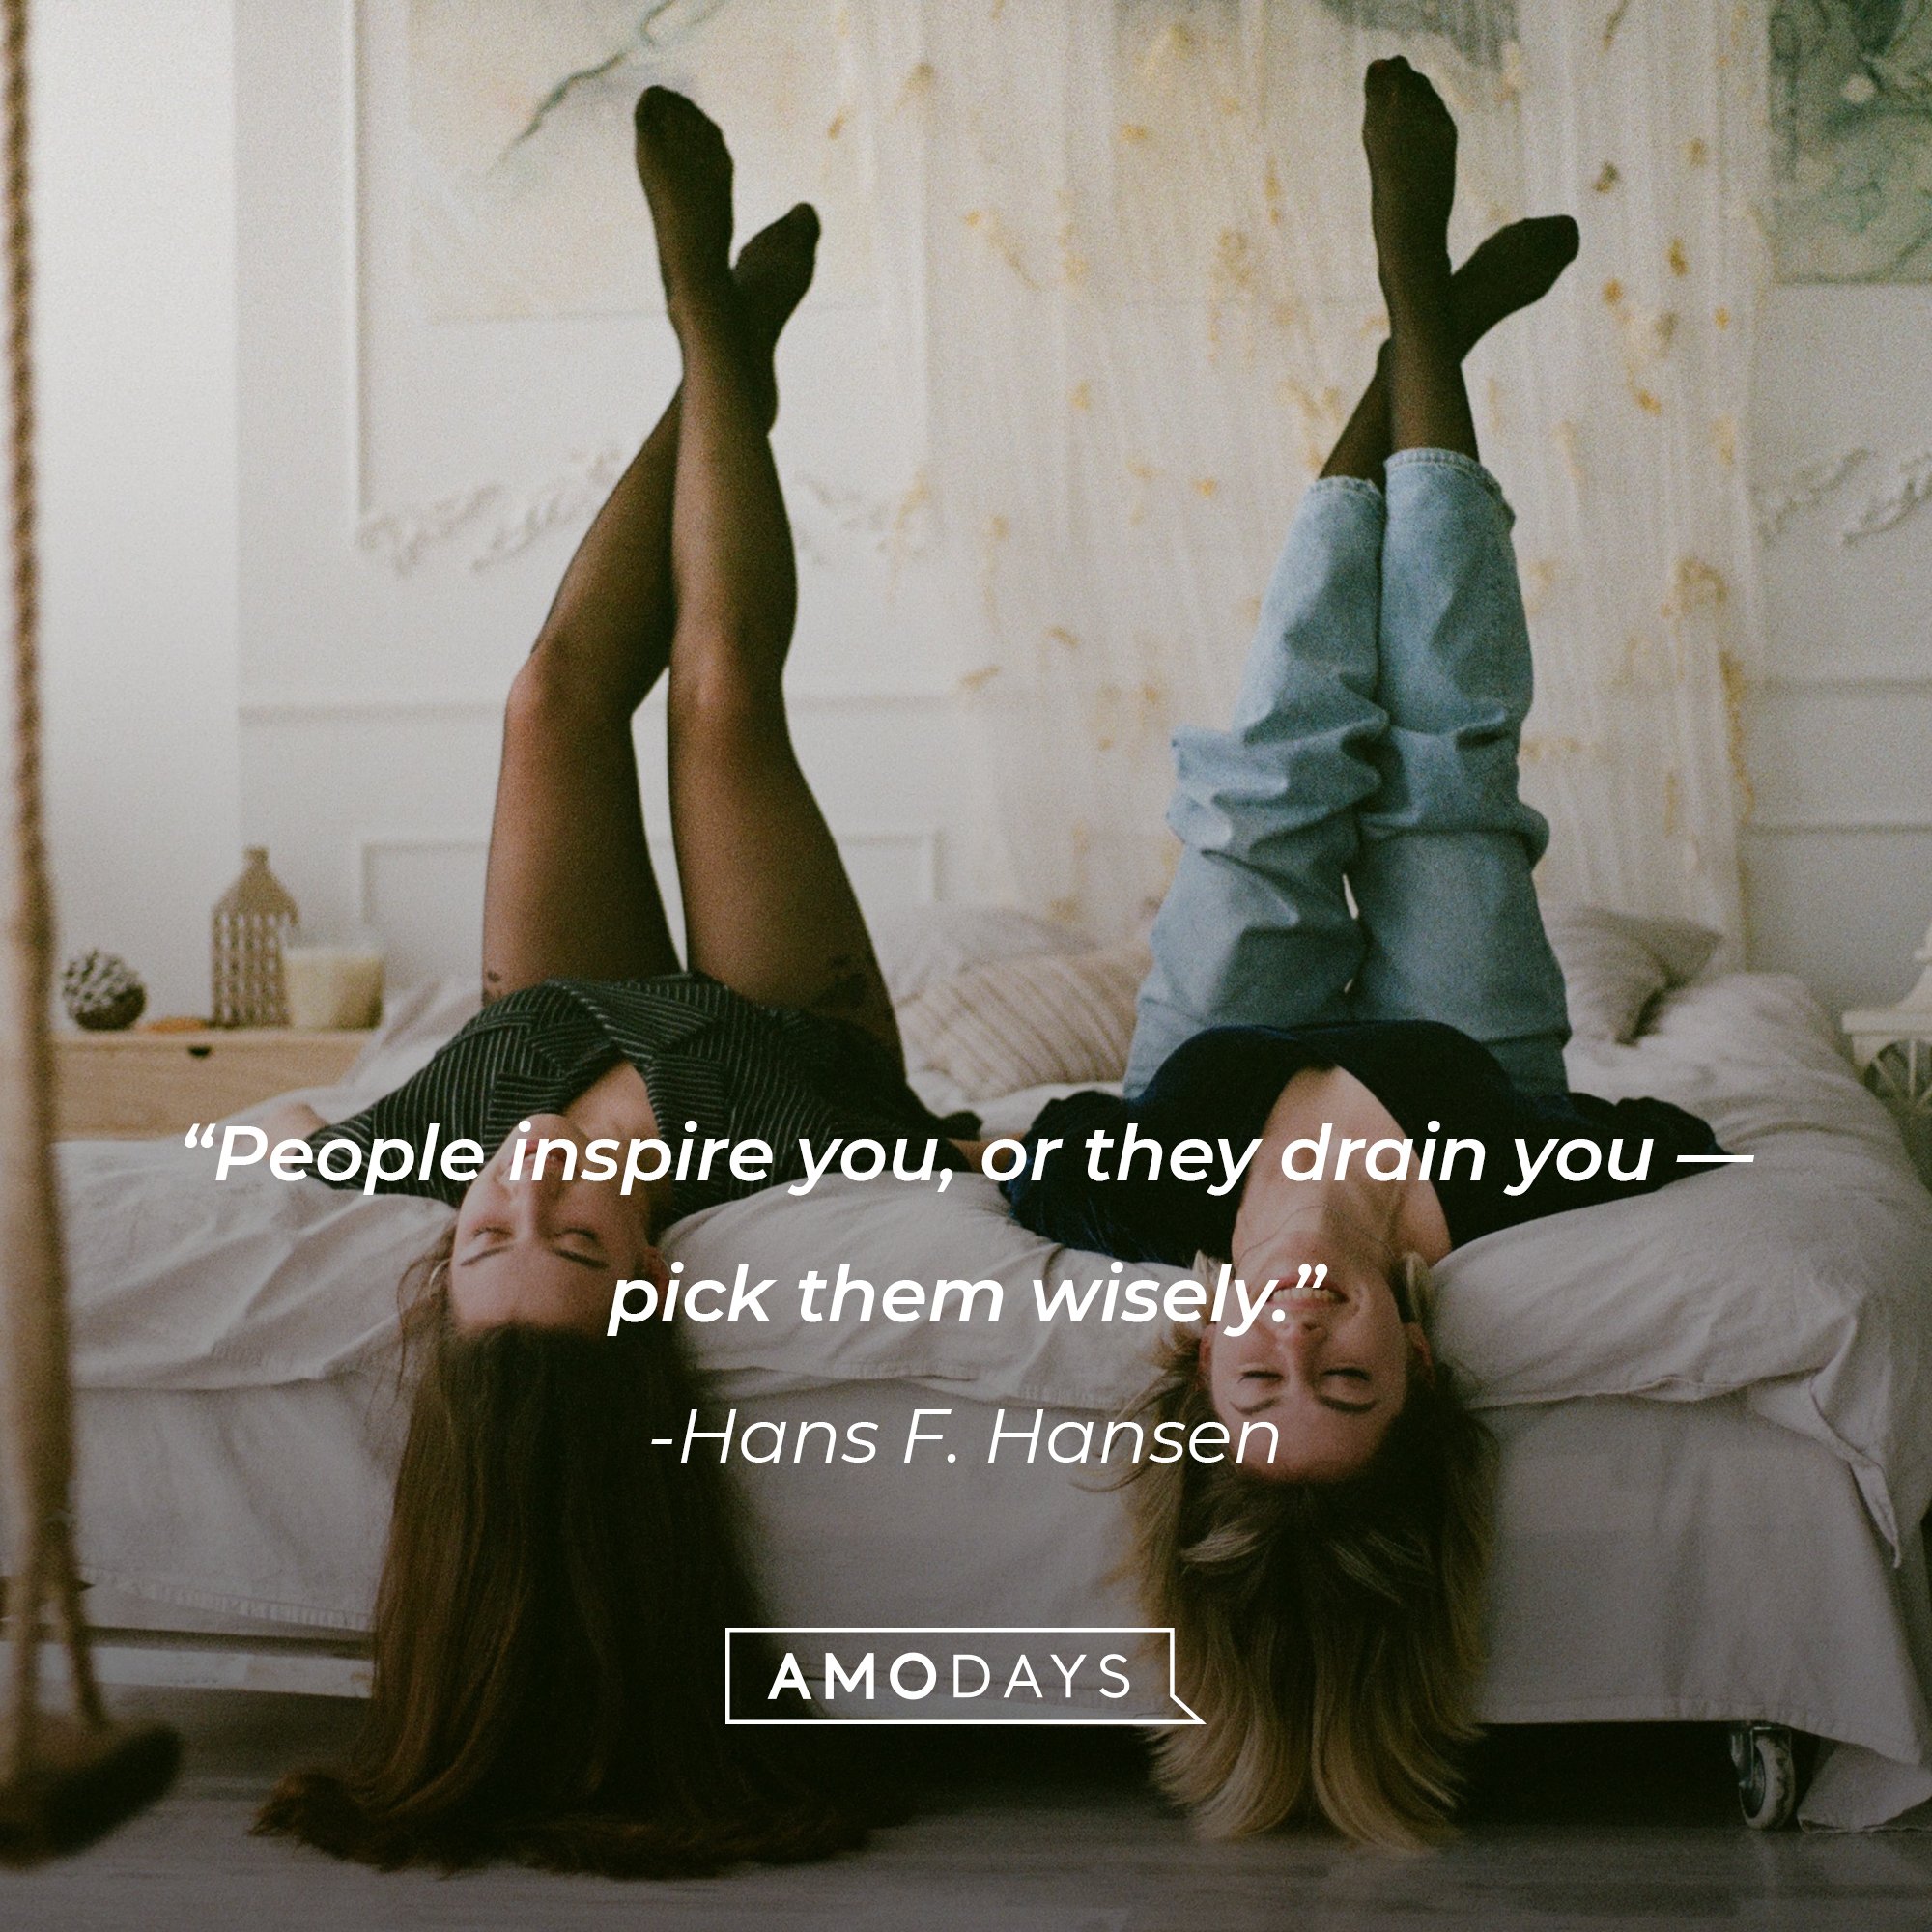 Hans F. Hansen's quote: “People inspire you, or they drain you — pick them wisely.” | Image: AmoDays